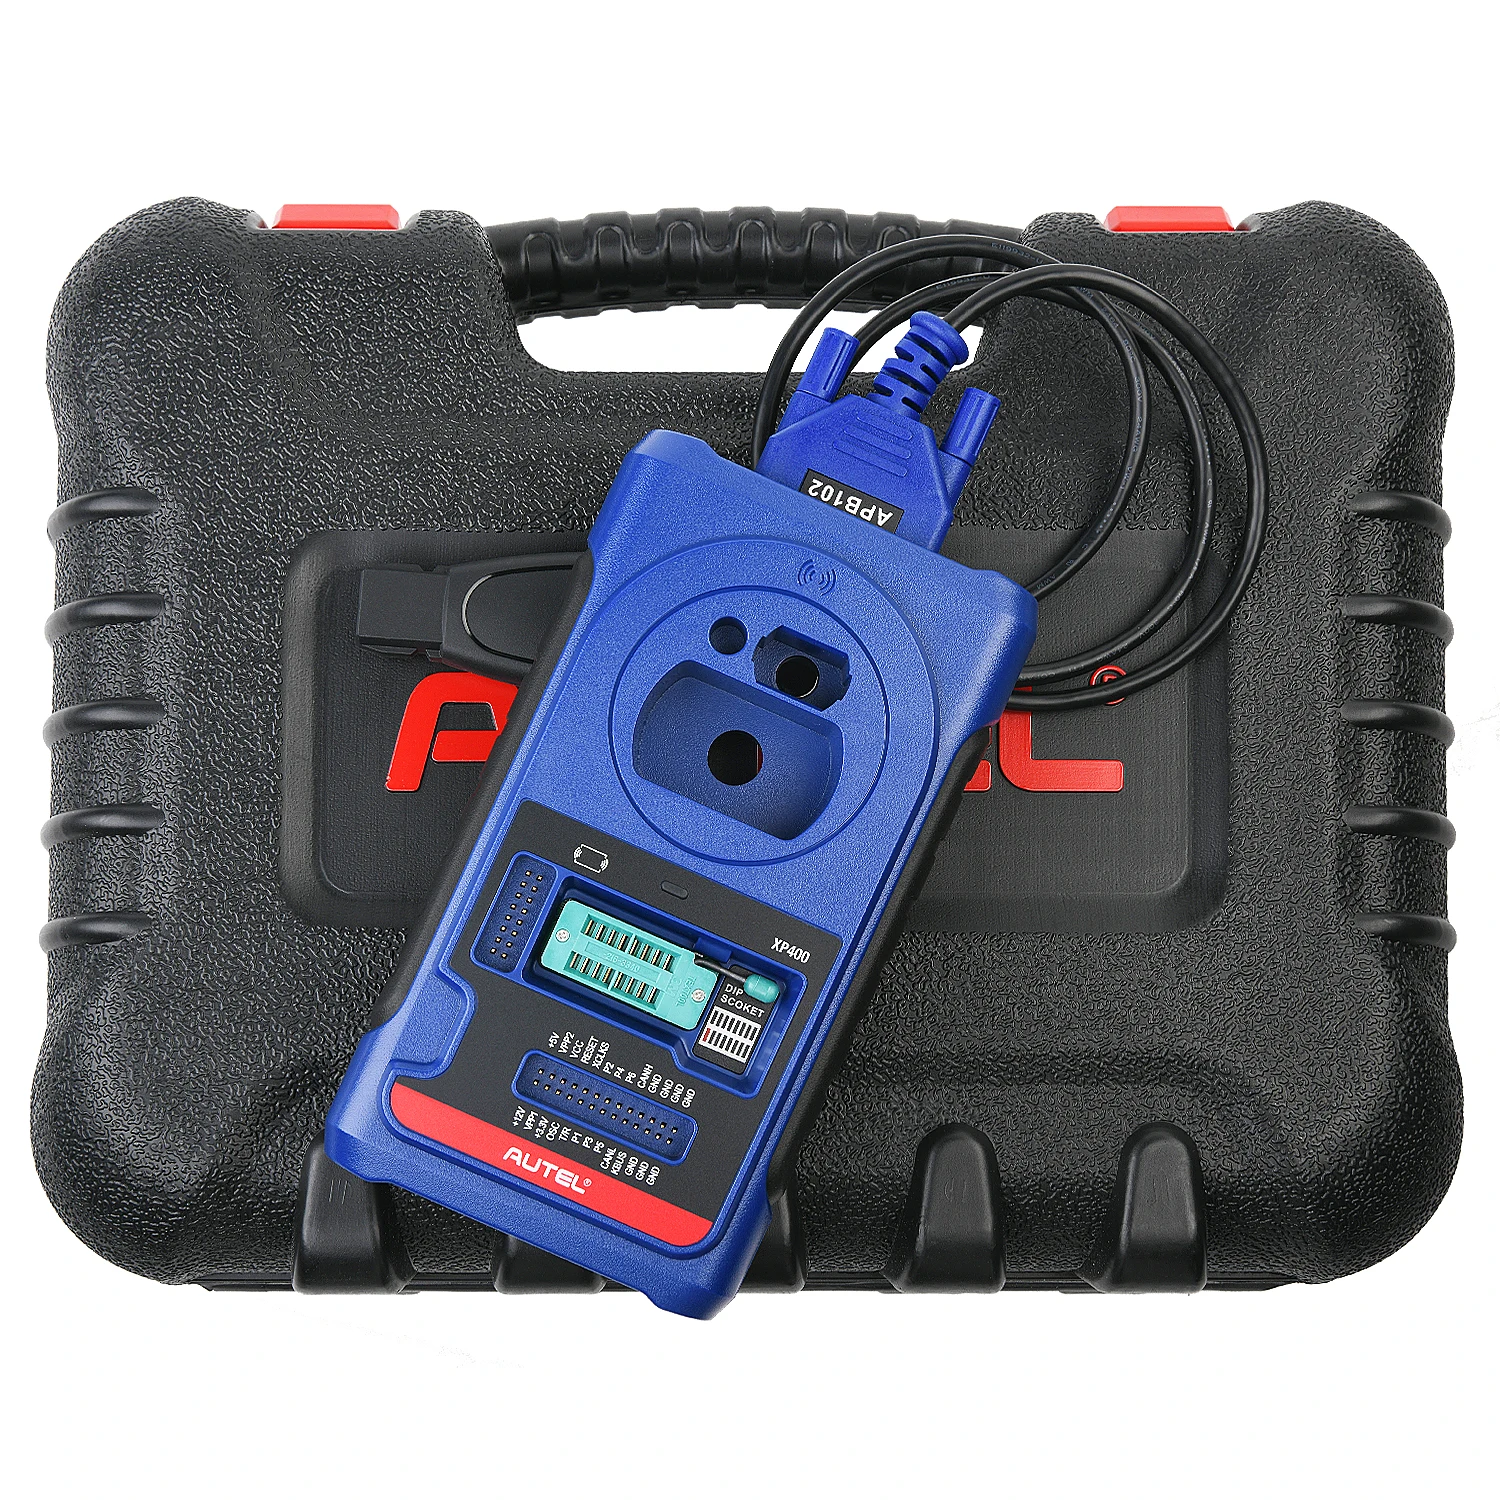 

Autel XP400 Pro Adapter Key and Chip Programmer Diagnostic Tool automotive scanners Work with Autel MaxiIM IM608 IM608 Pro IM508